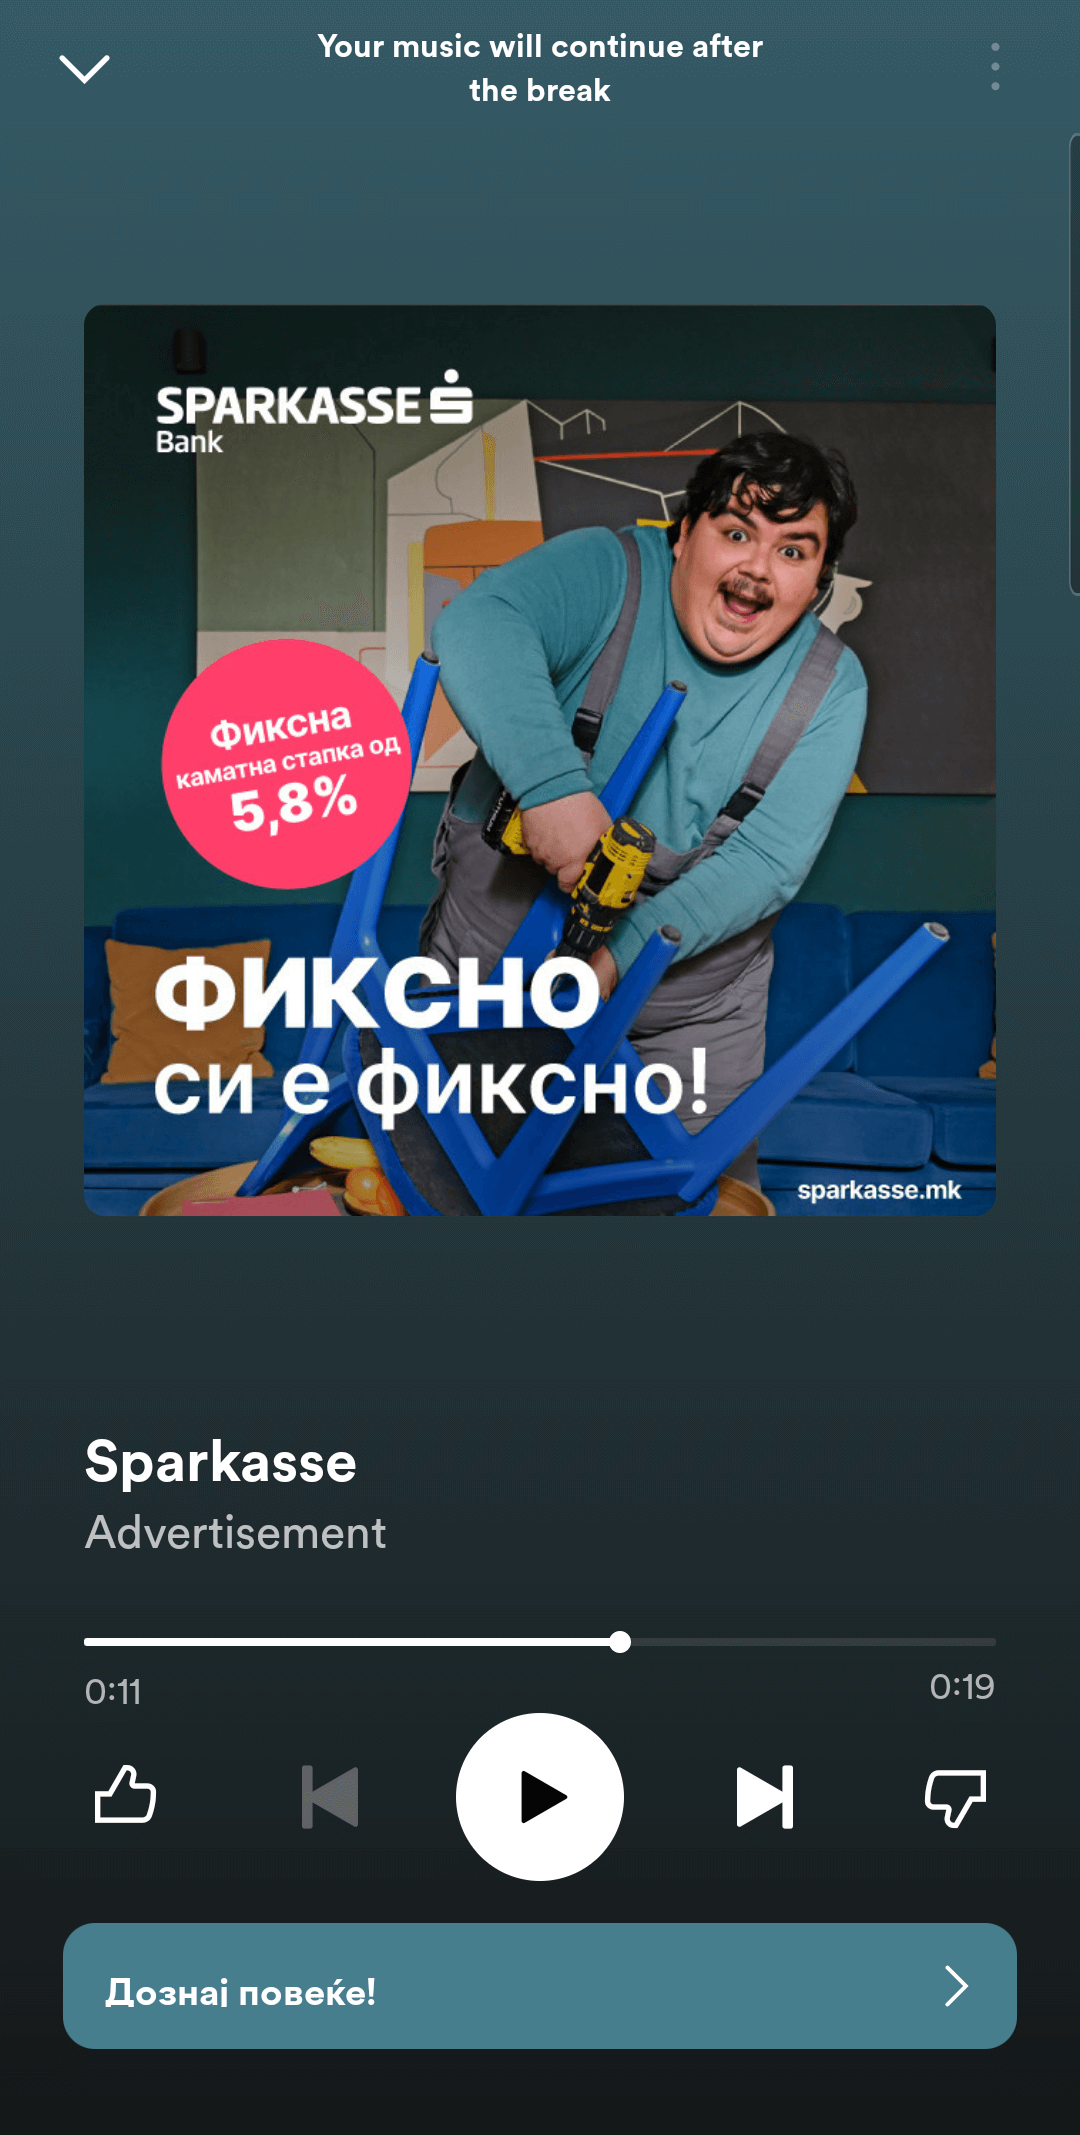 Spotify ad for Sparkasse